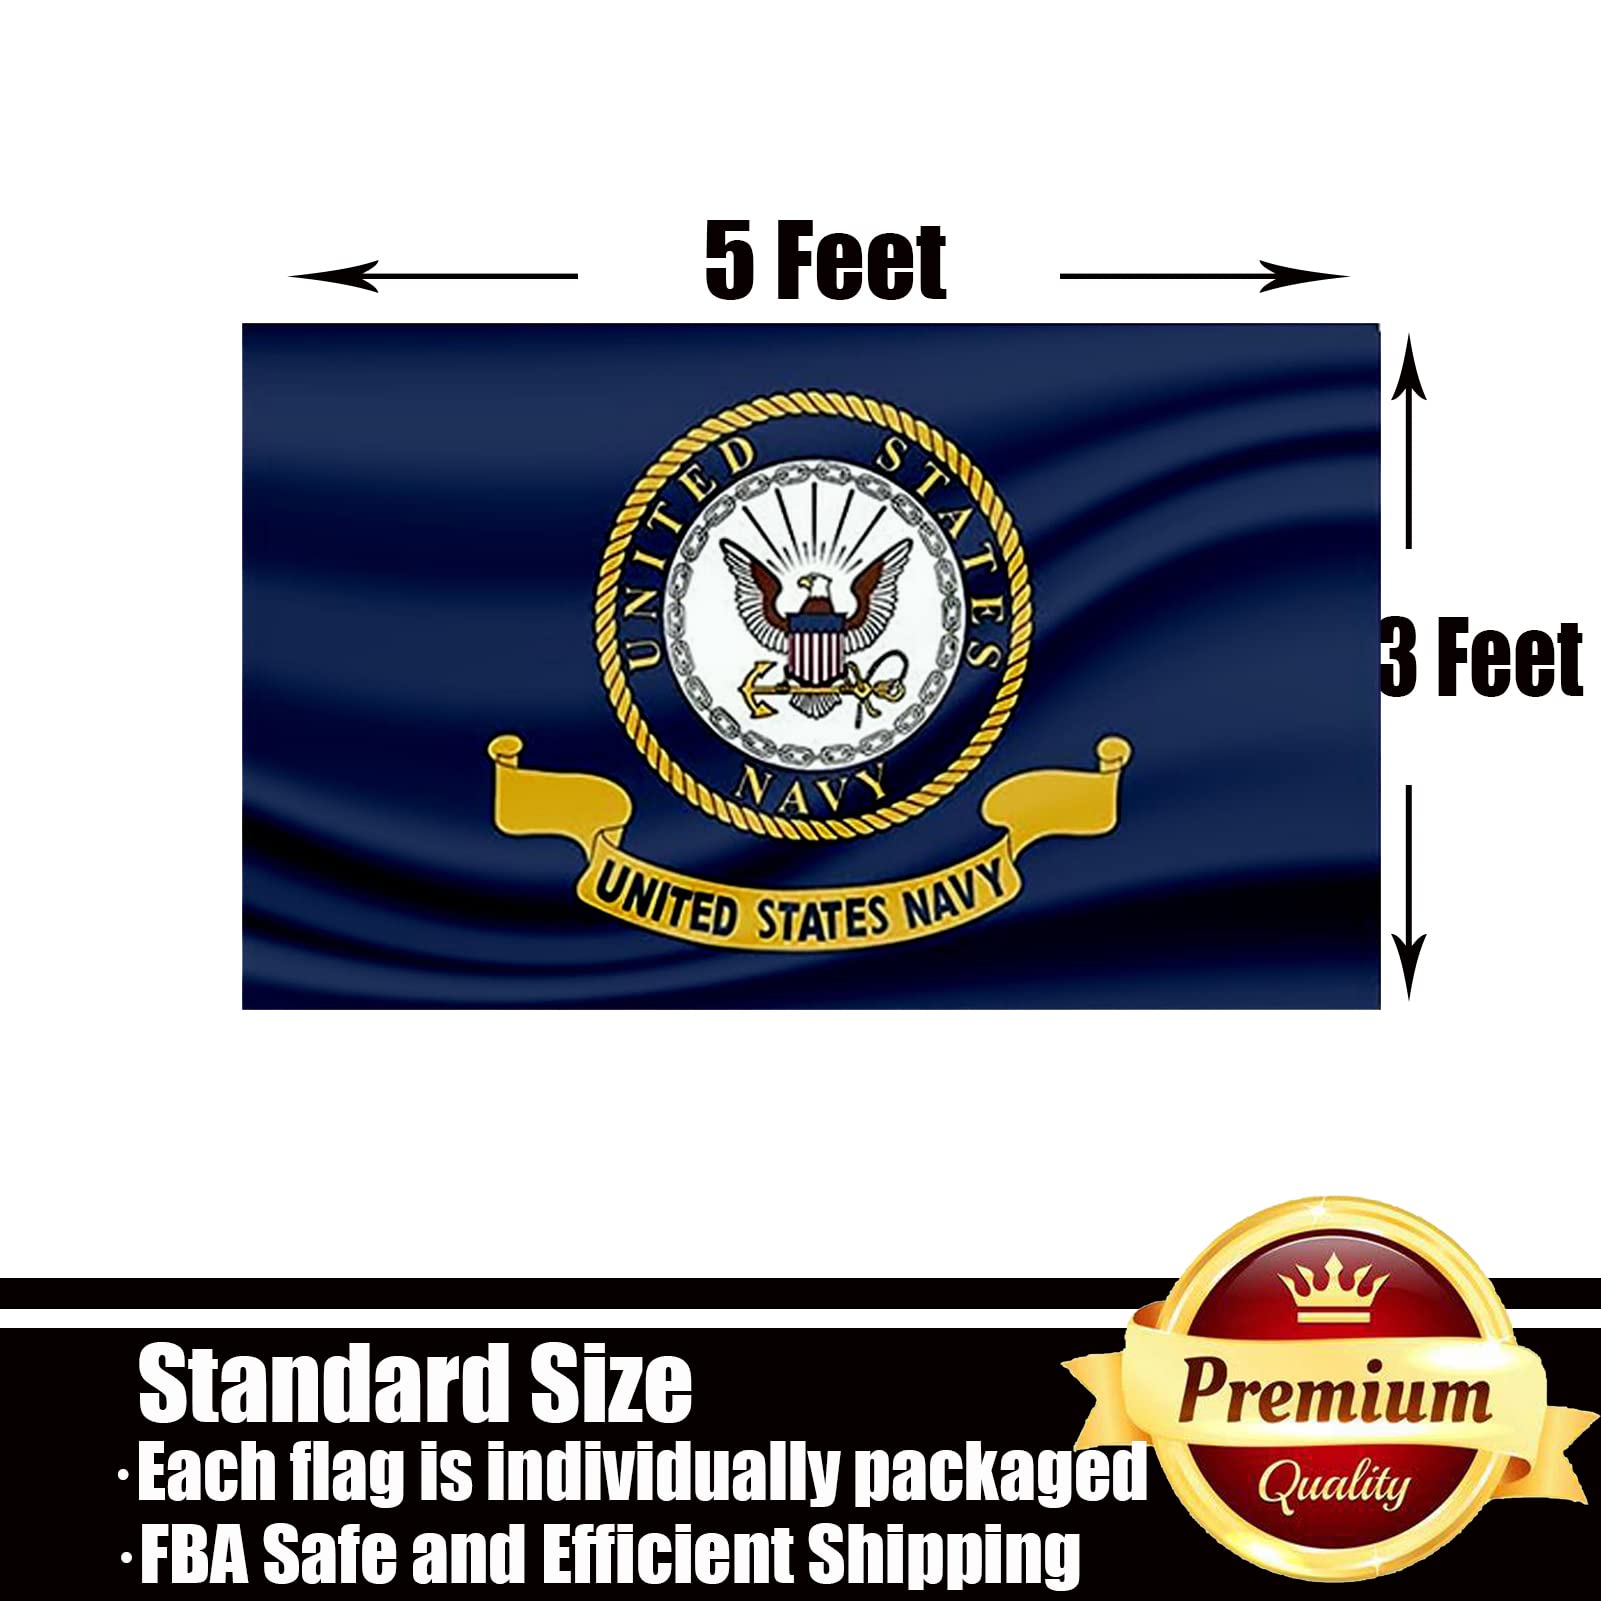 US Navy Emblem Flags 3x5 Outdoor Double Sided 3 Ply-United States Naval Military Flag Vivid Color Clear Pattern Reinforcement Sewing Durable Polyester with 2 Brass Grommets